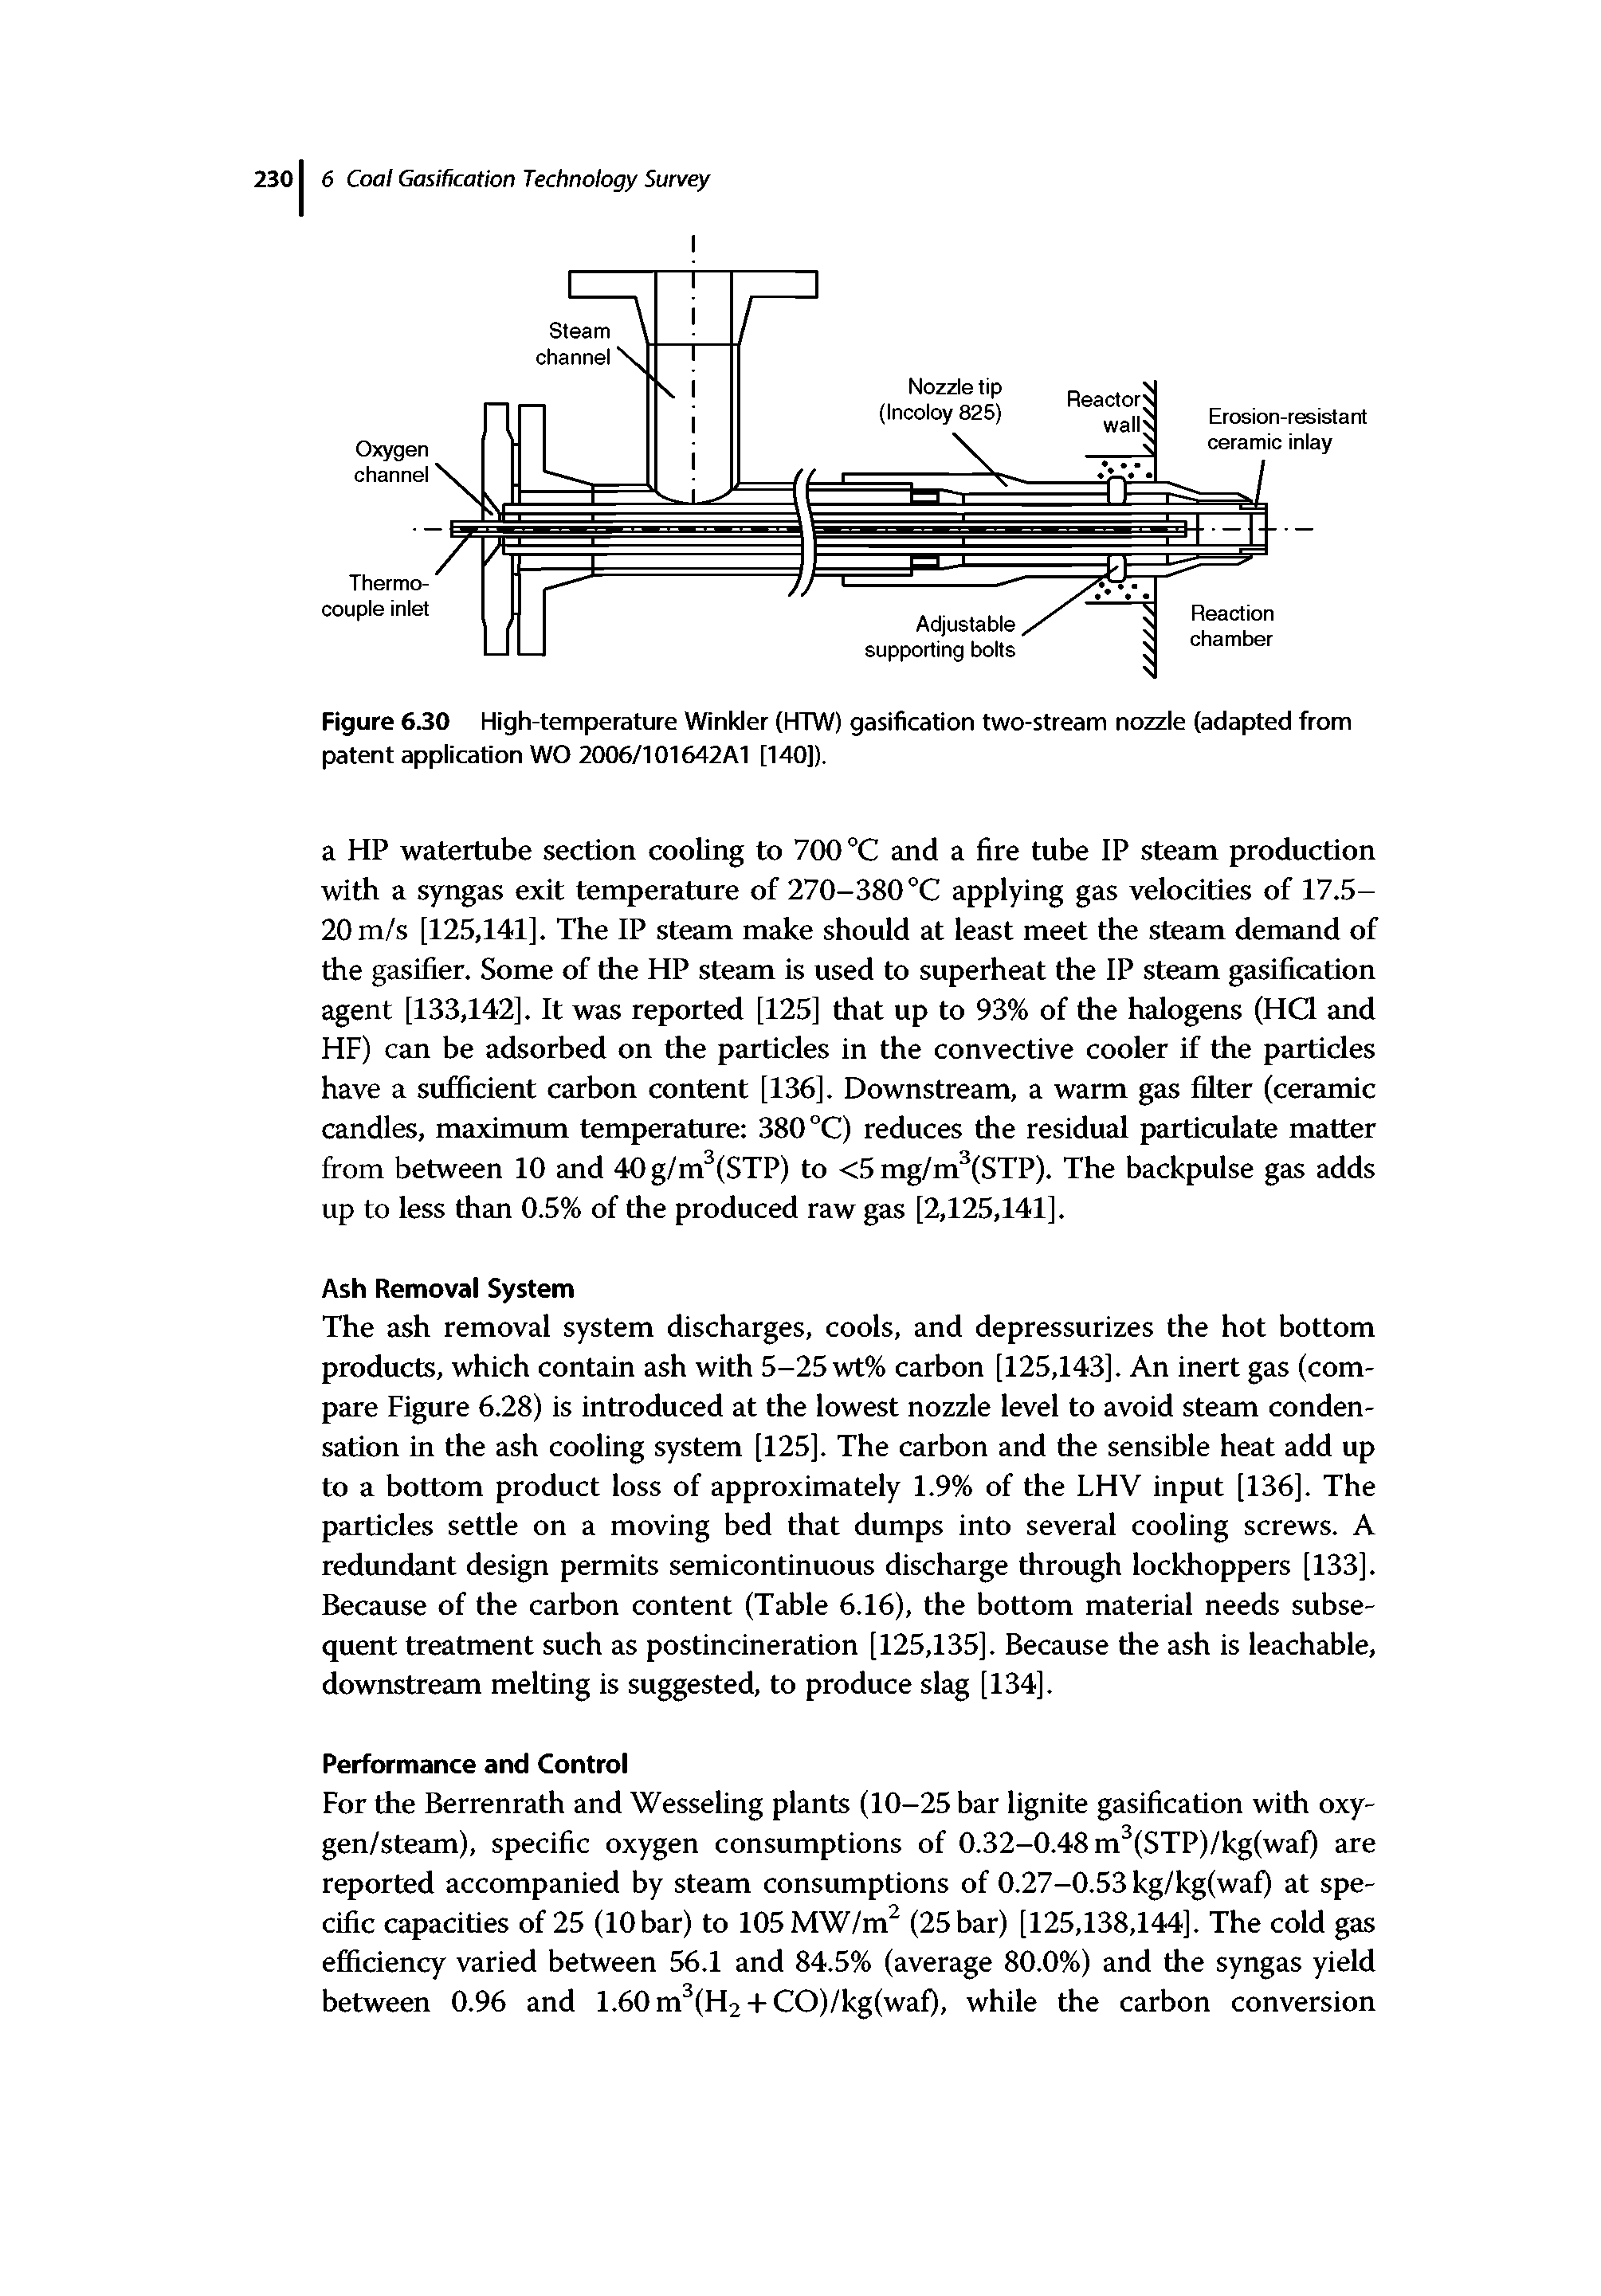 Figure 630 High-temperature Winkler (HTW) gasification two-stream nozzle (adapted from patent application WO 2006/101642A1 [140]).